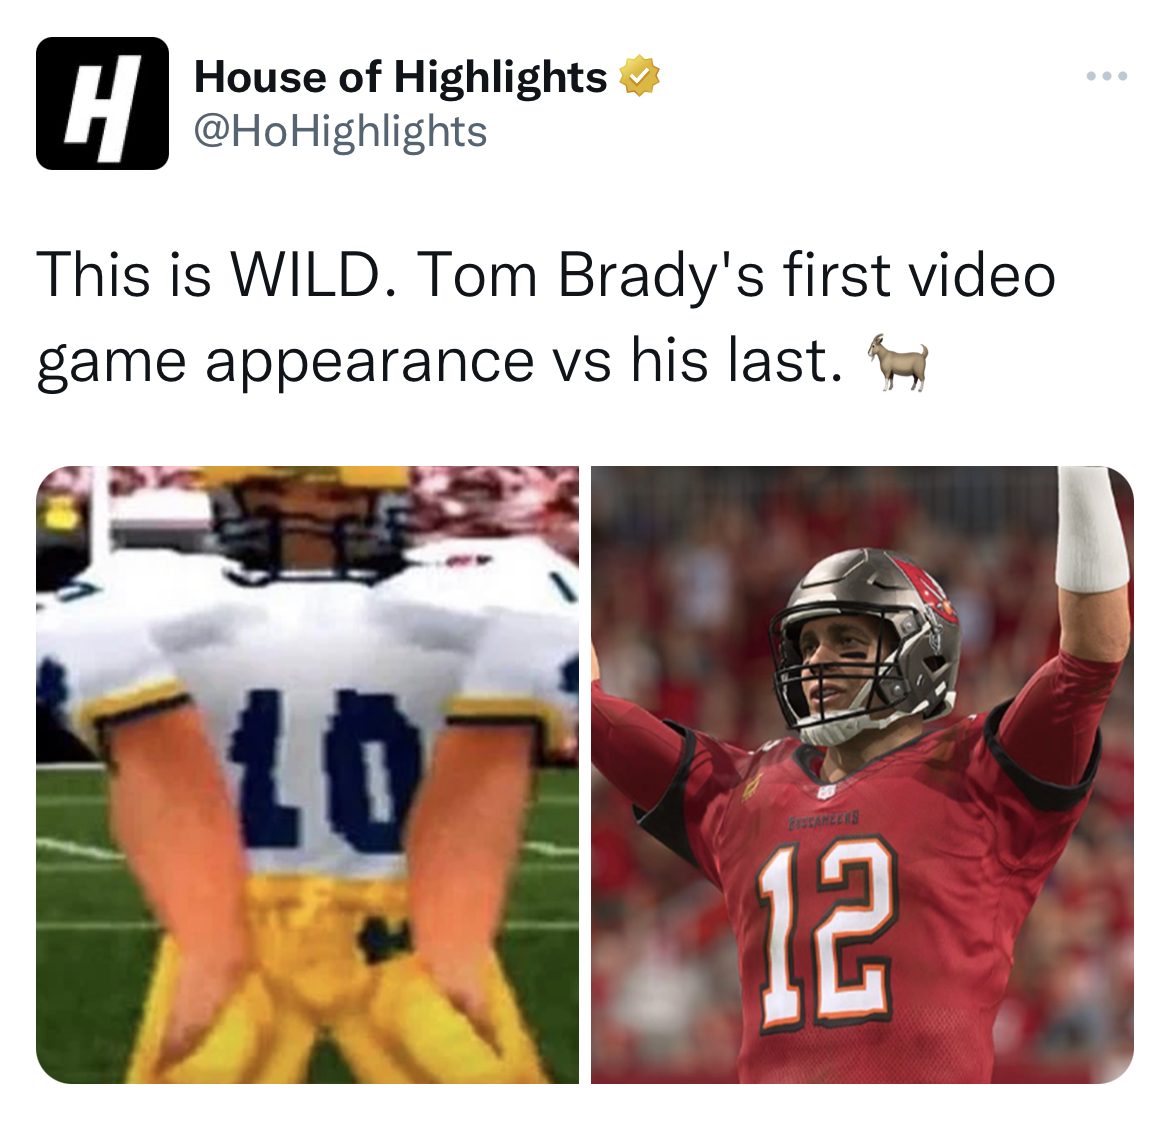 Tom Brady Retirement memes - jersey - House of Highlights H This is Wild. dy's first video game appearance vs his last. 107 12 ...